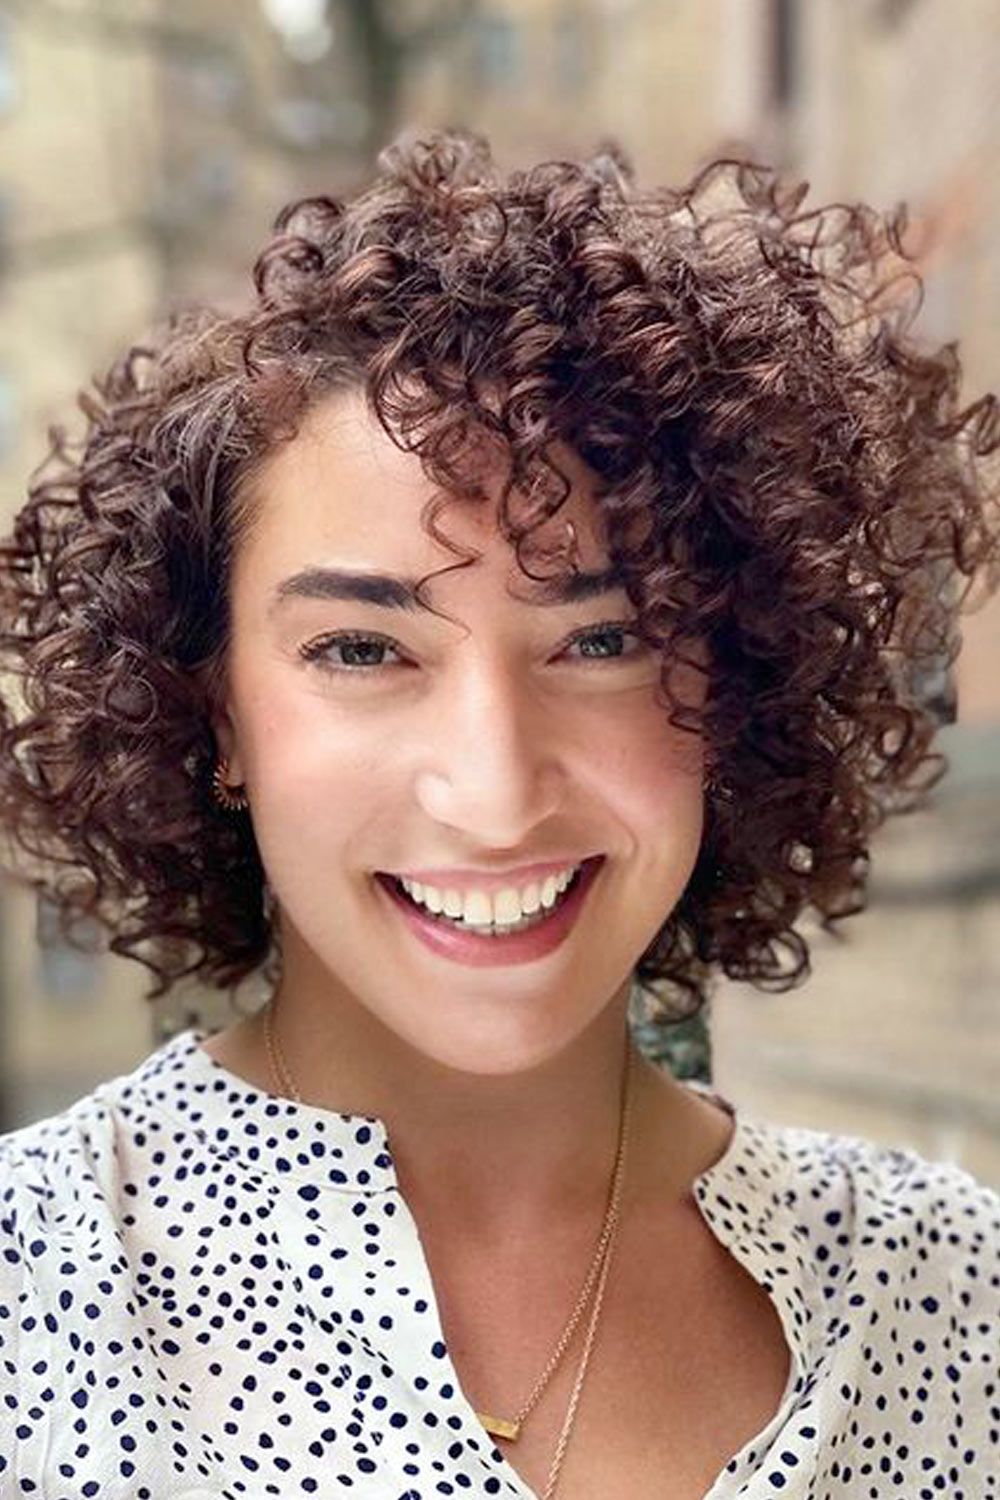 Short side parted curly hair appears playful and vivid, while you can only flip your curls to the side to achieve the style.